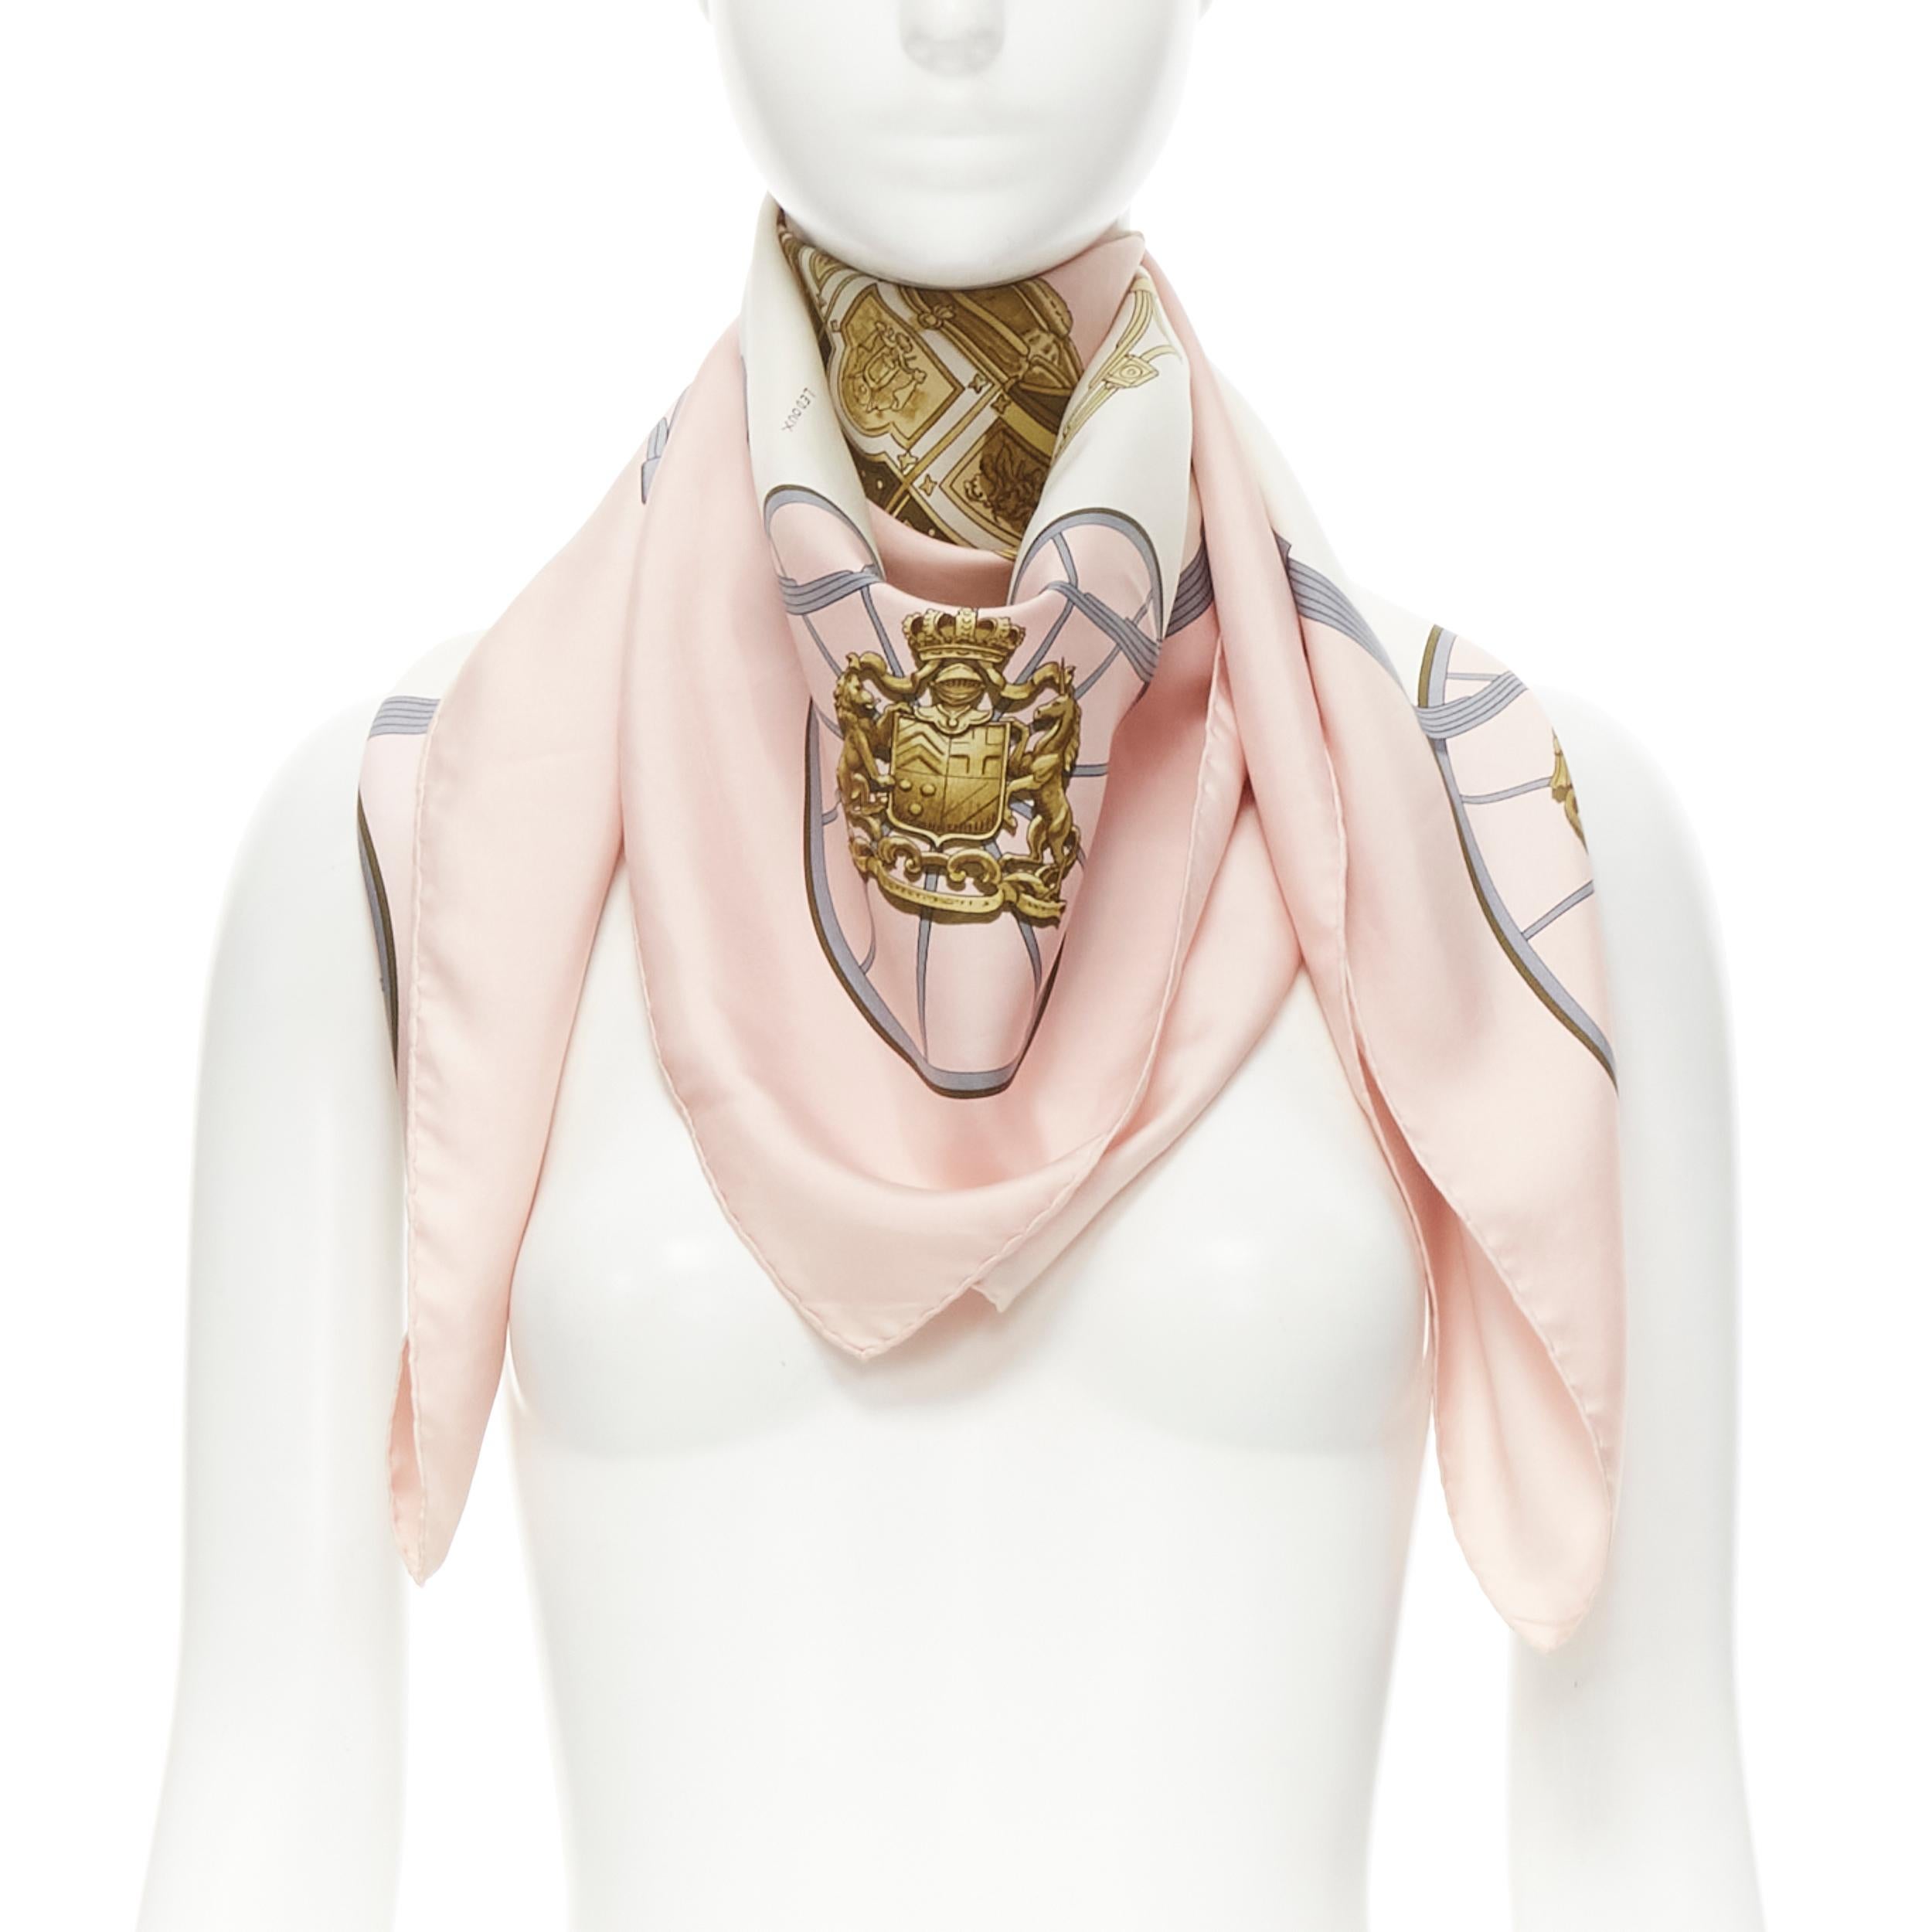 HERMES Phillippe Ledoux 1998 'Springs' pink gold print twill silk scarf 
Reference: AEMA/A00070 
Brand: Hermes 
Collection: 1998 
Material: Silk 
Color: Pink 
Made in: France 

CONDITION: 
Condition: Good, this item was pre-owned and is in good